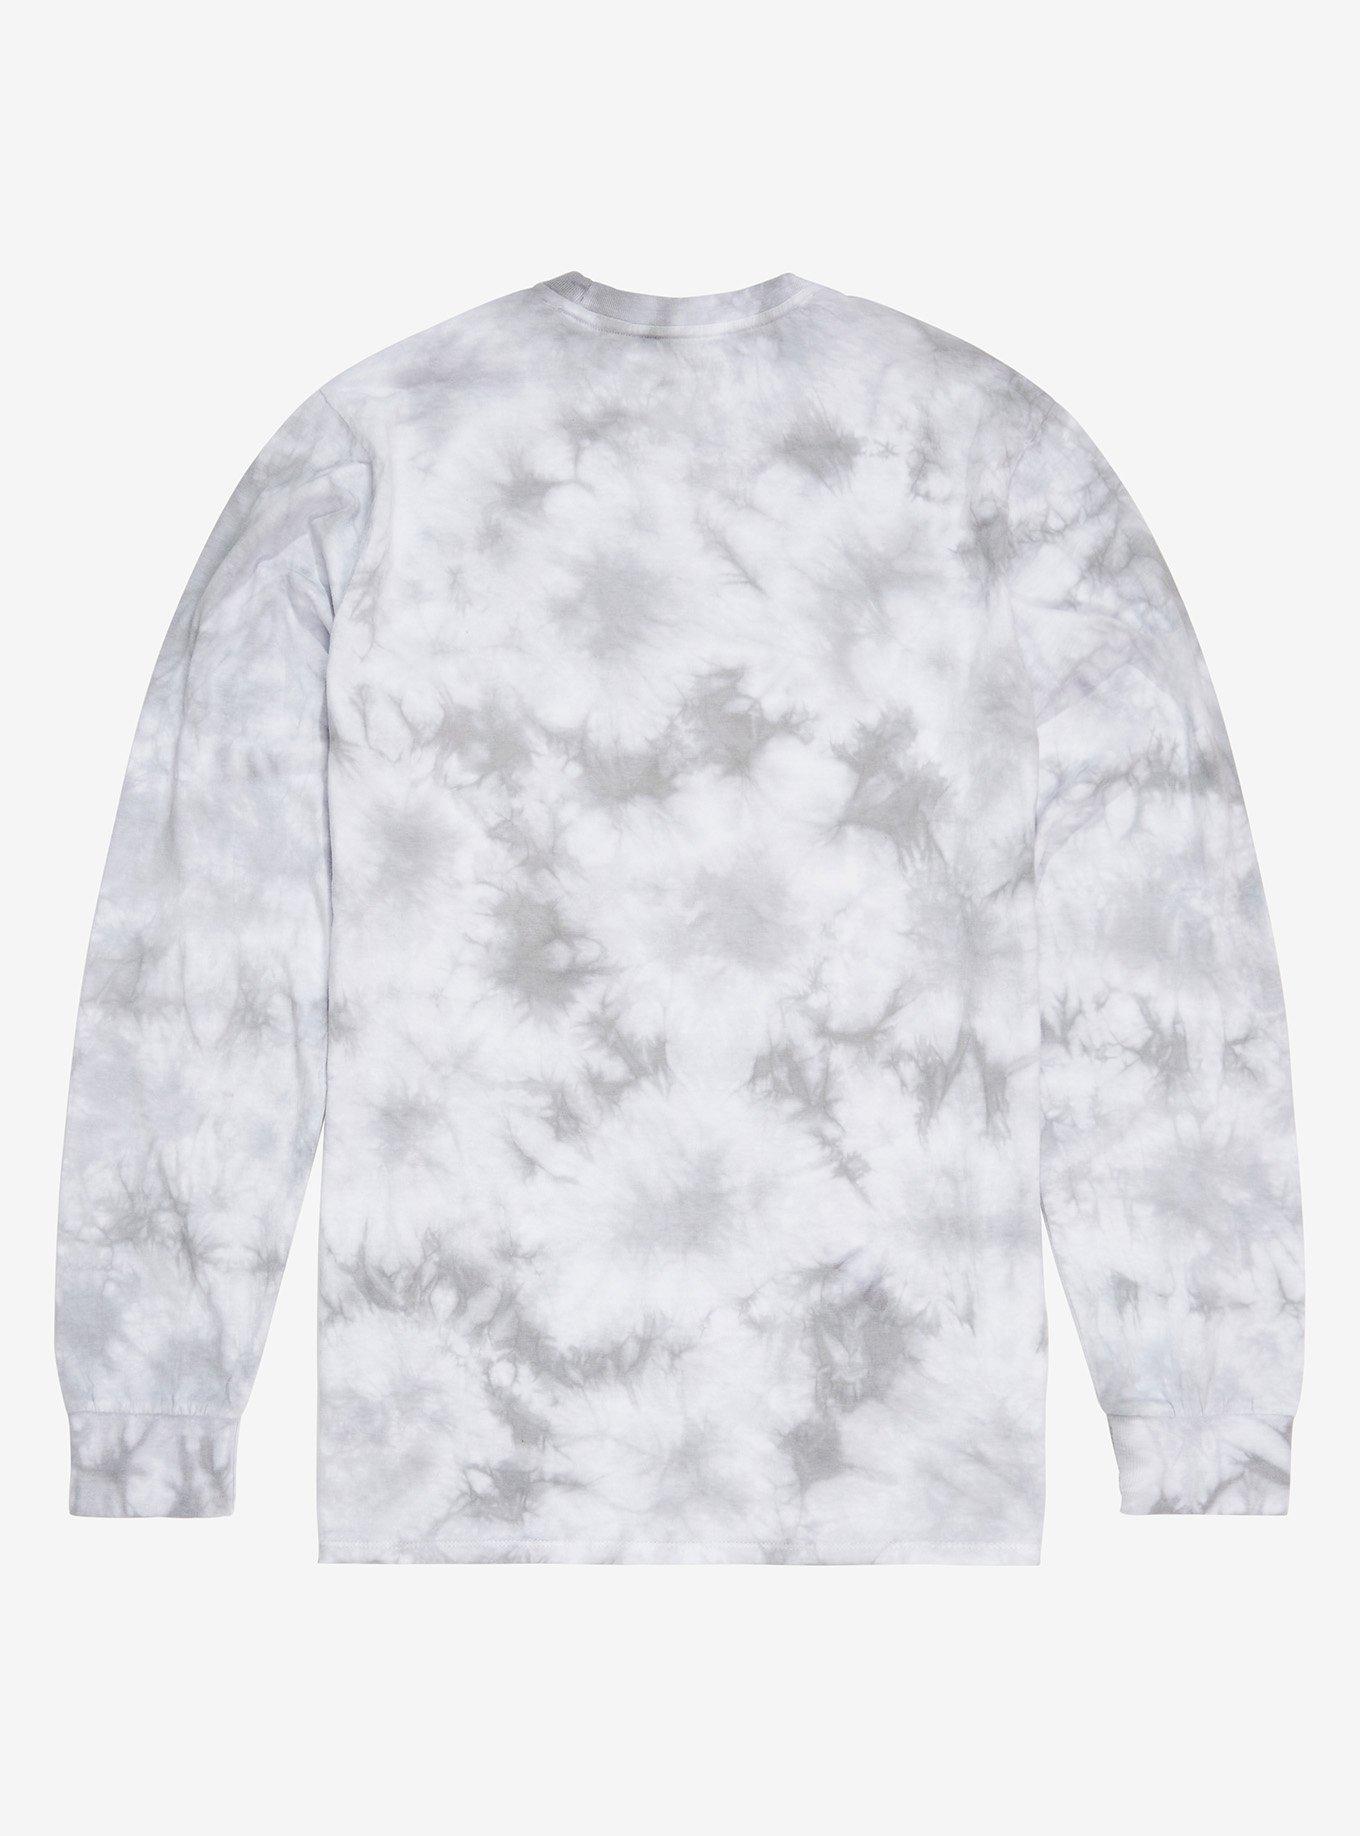 The Lord of the Rings Mordor Long Sleeve Tie-Dye T-Shirt - BoxLunch Exclusive , TIE DYE - GREY, alternate